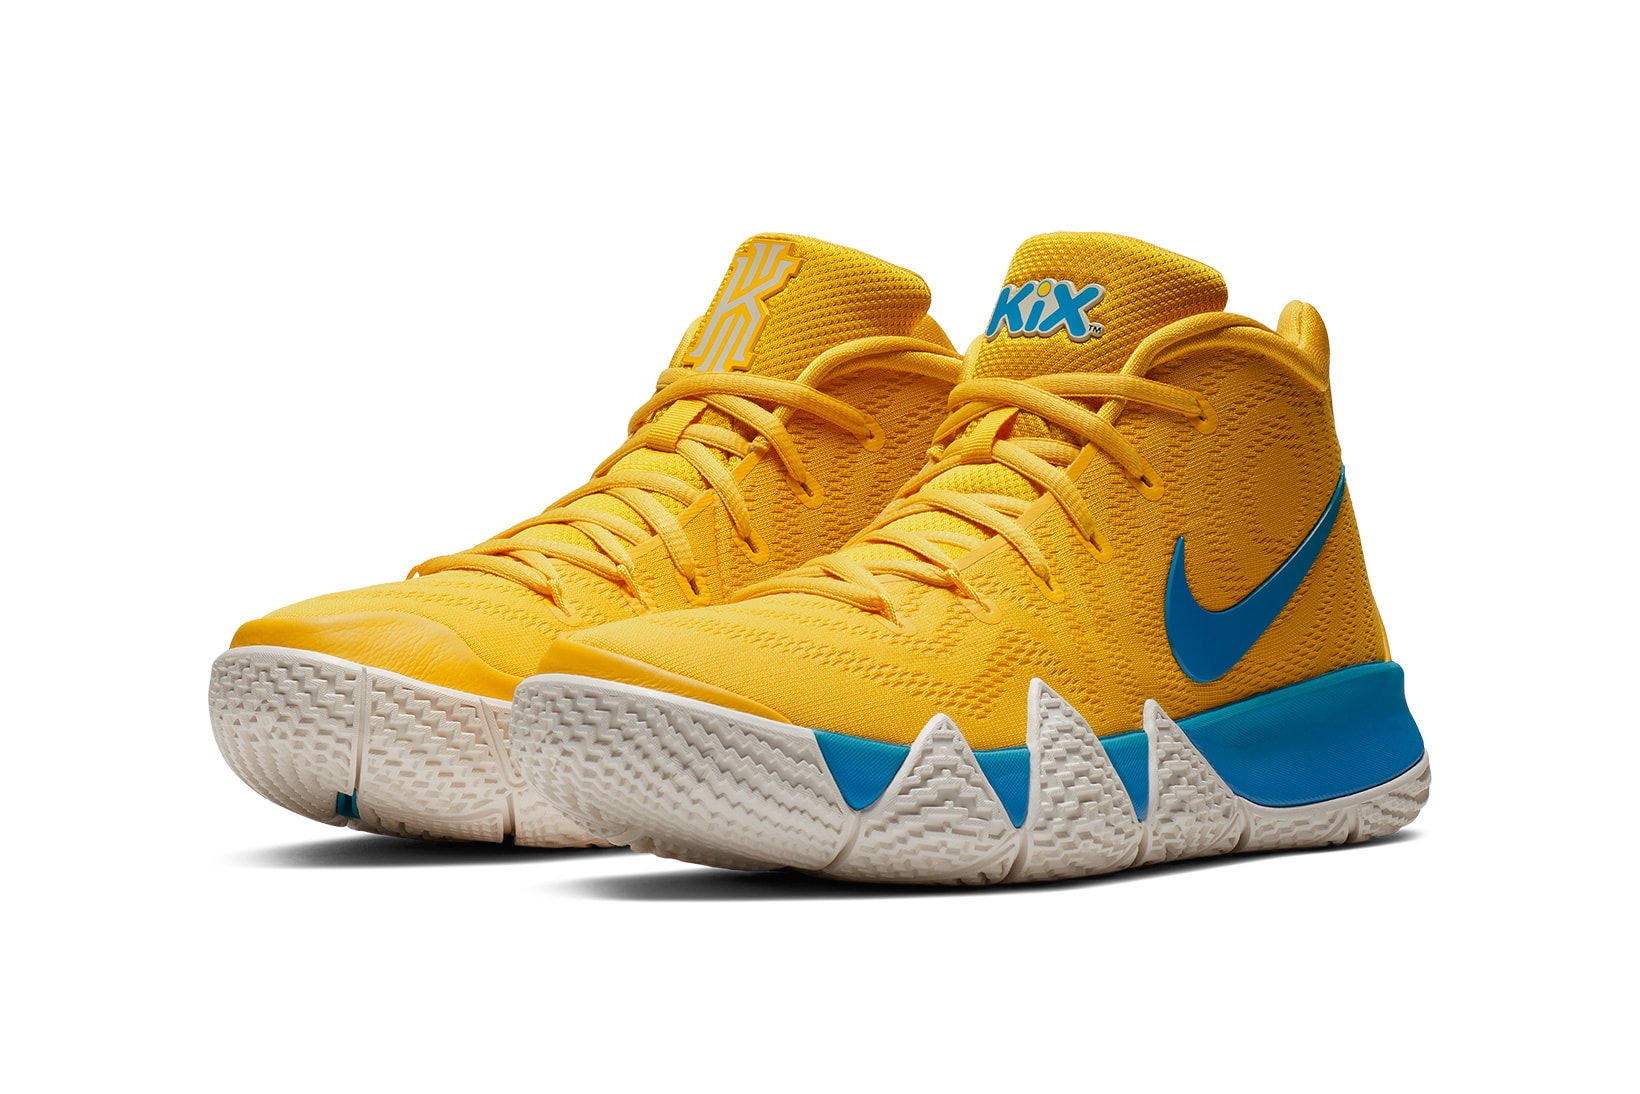 Nike Kyrie 4 Cereal Pack Official Look & Release